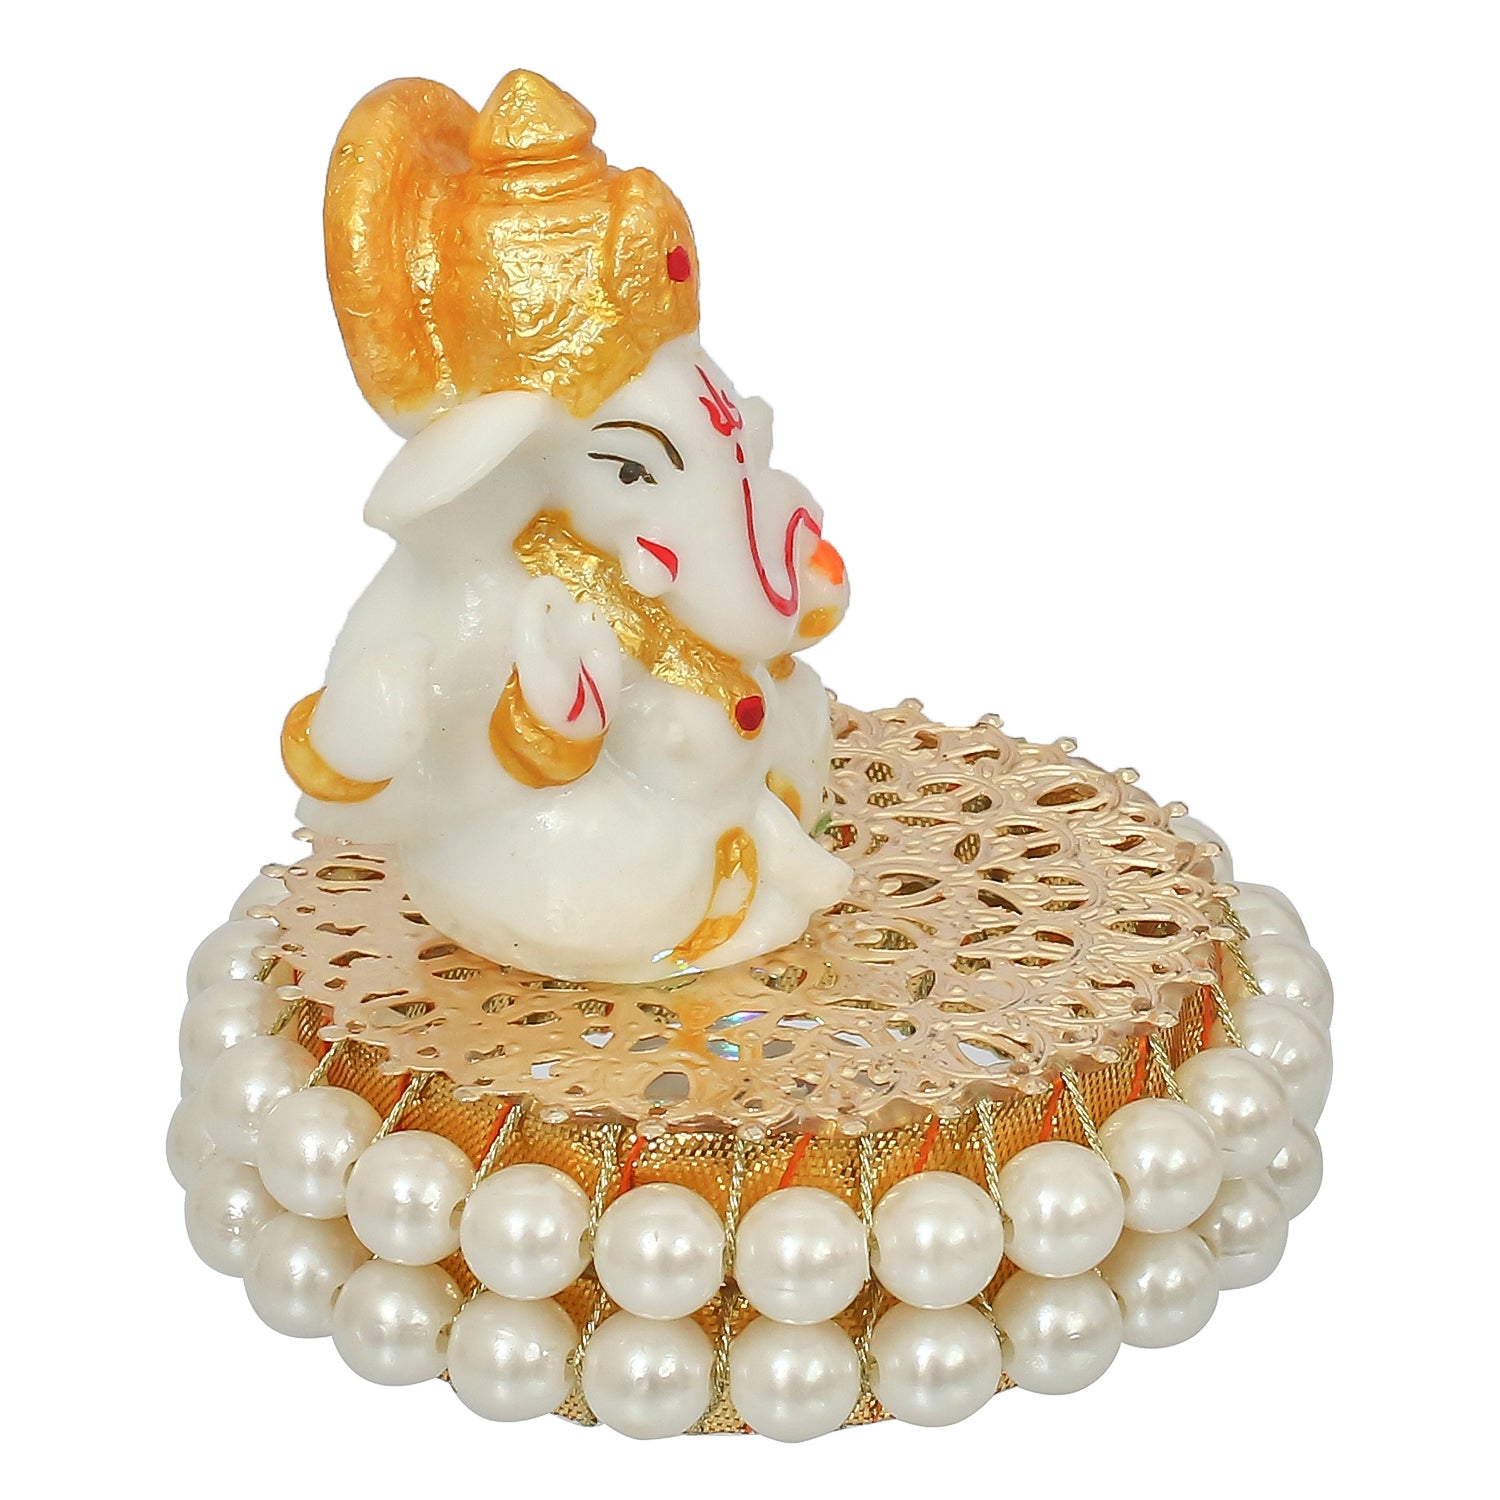 Gold and White Polyresin Lord Ganesha Idol on Decorative Handcrafted Plate for Home and Car Dashboard 6